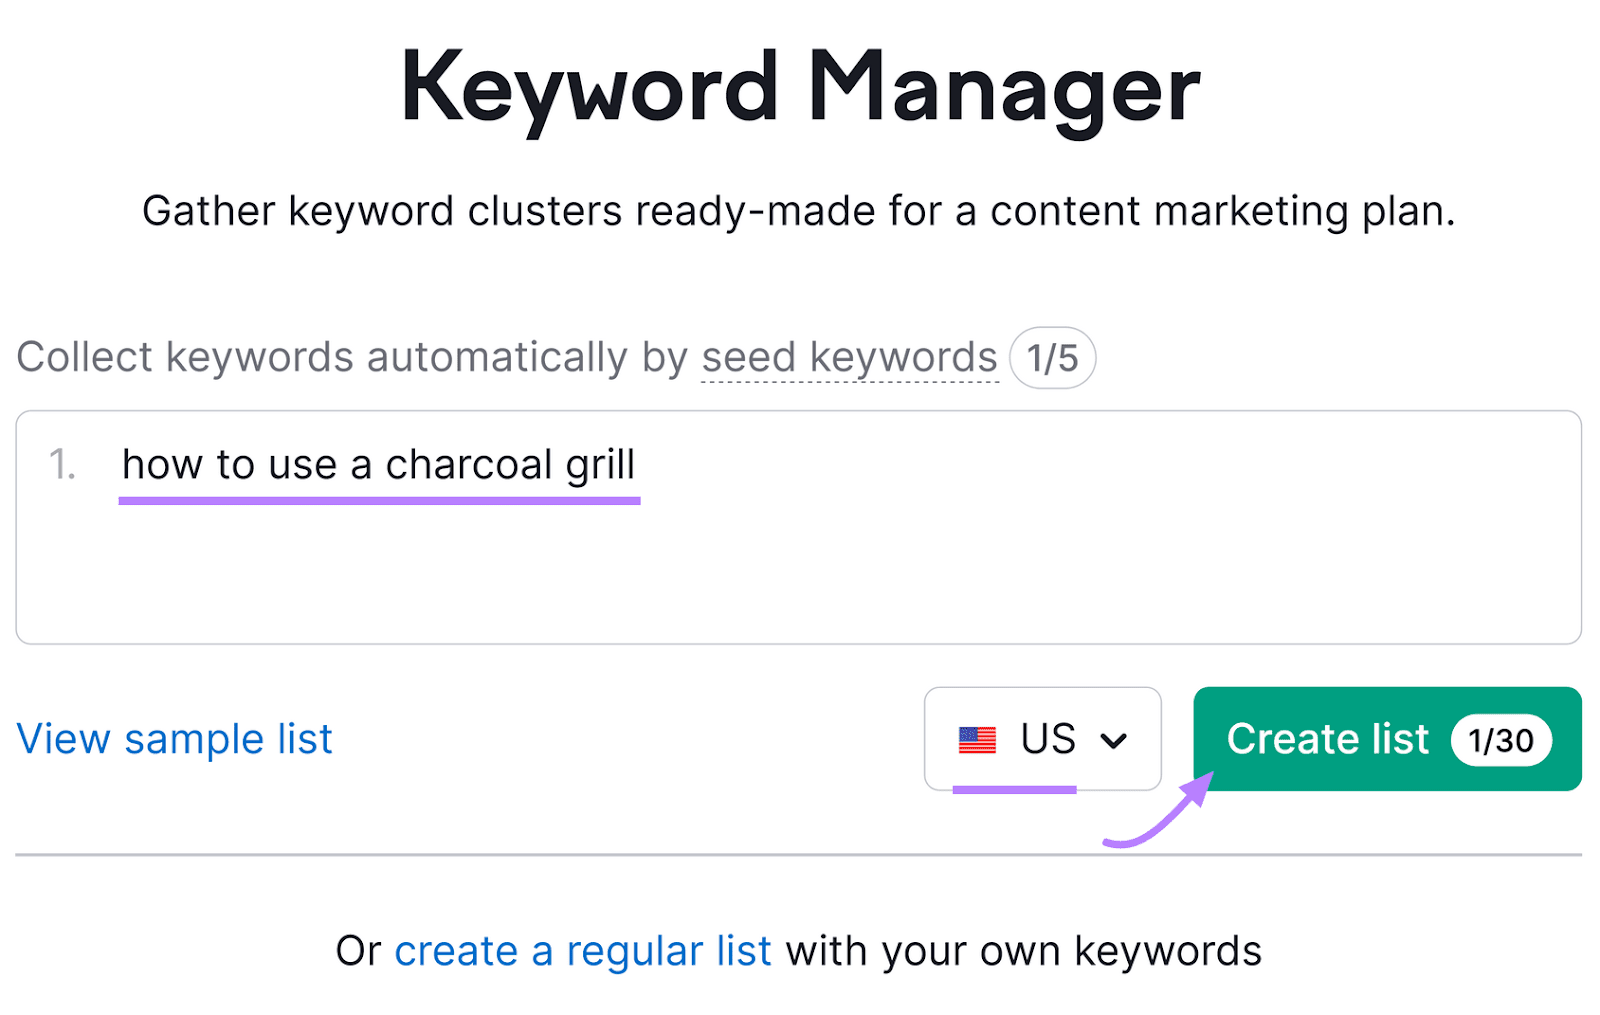 Keyword Manager tool with "how to use a charcoal grill" in the entry field and a button for list creation.